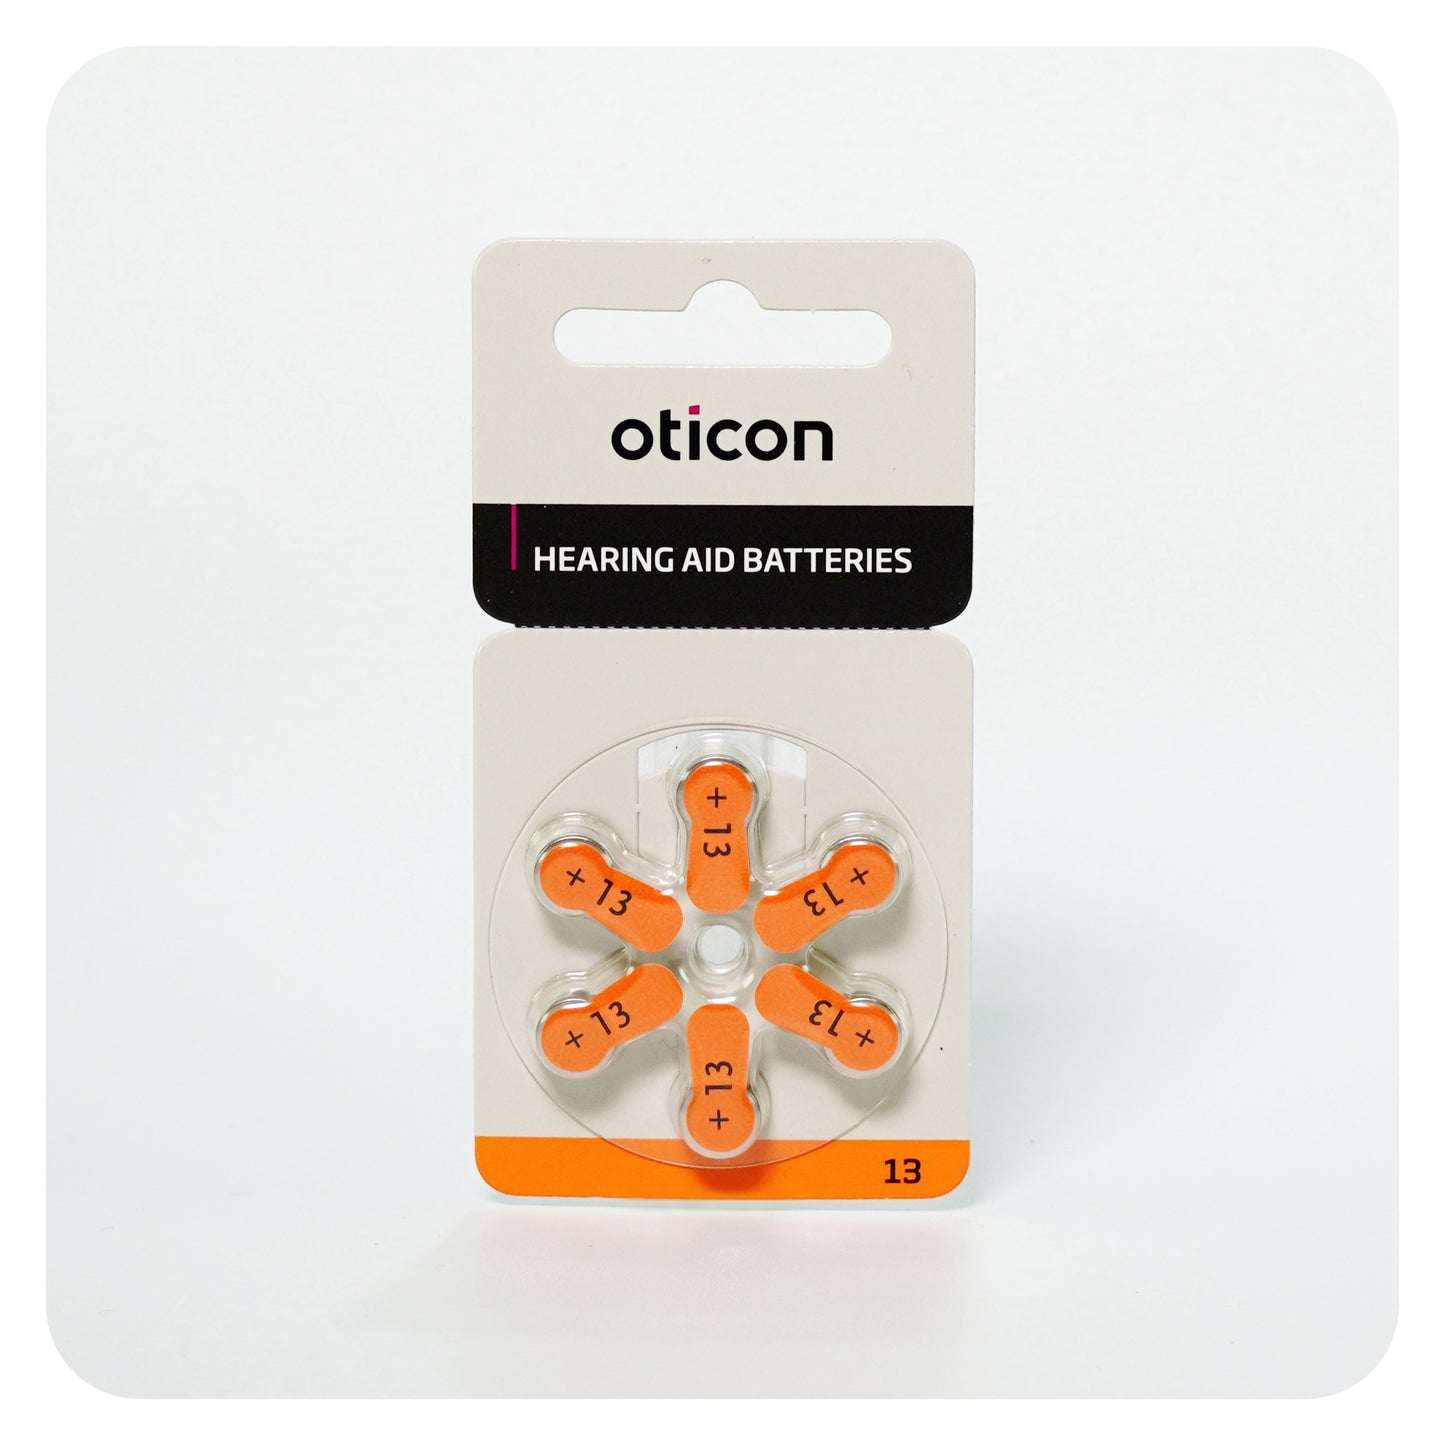 Oticon Hearing Aid Battery Pack - Size 13